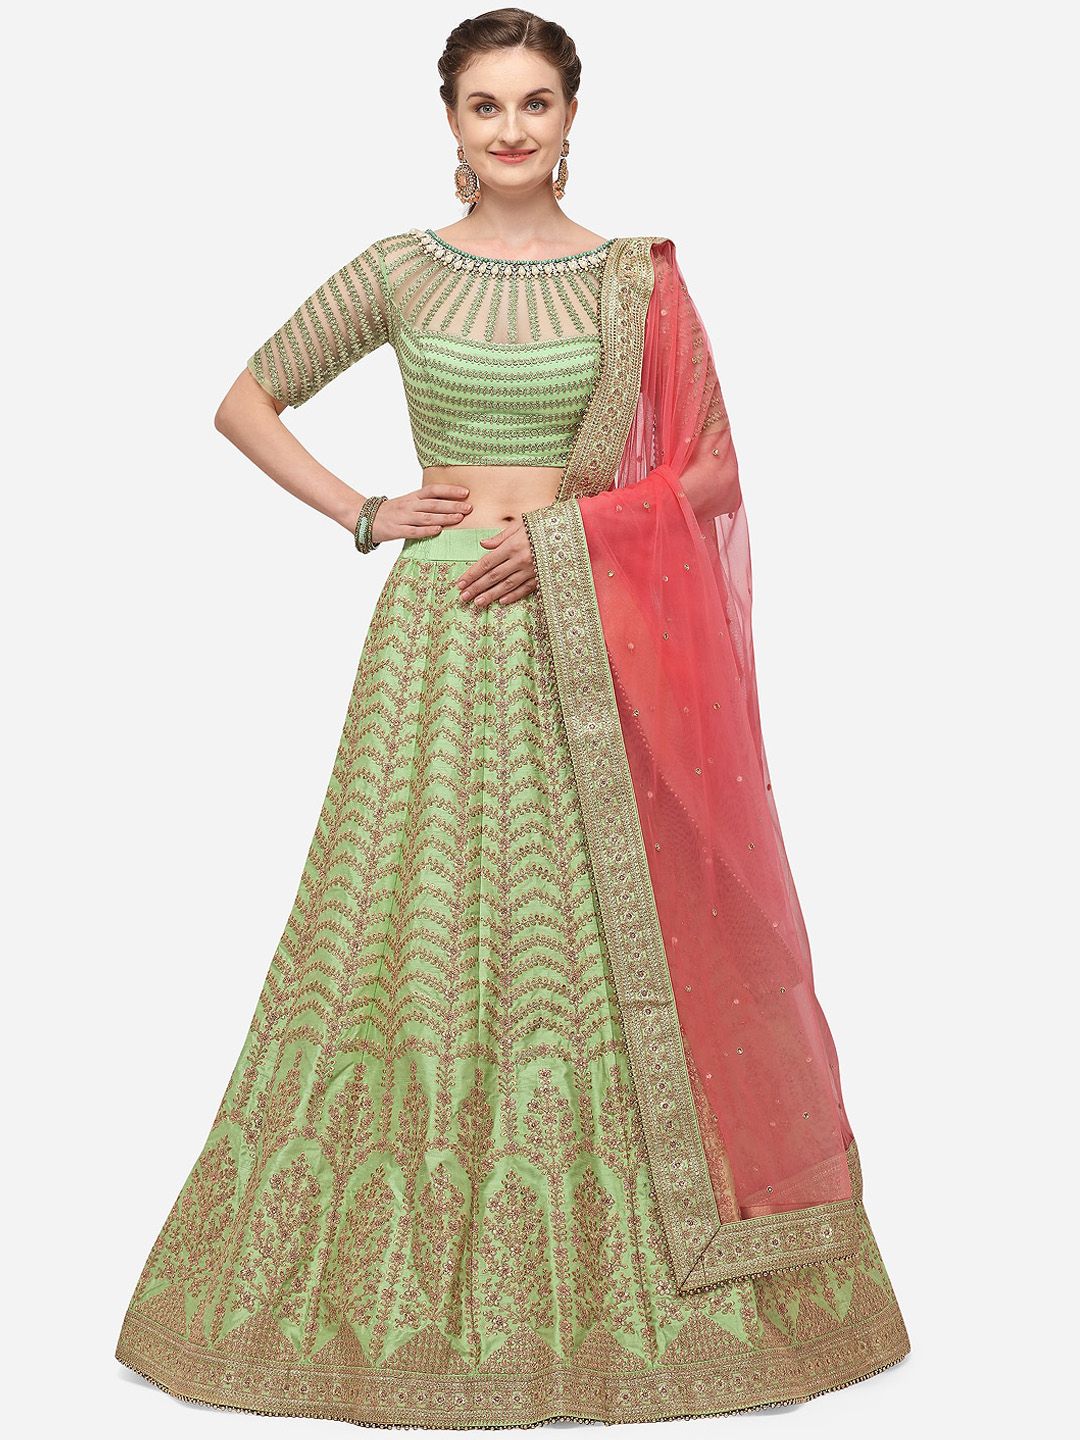 NAKKASHI Green & Gold-Toned Embroidered Semi-Stitched Lehenga & Unstitched Blouse with Dupatta Price in India